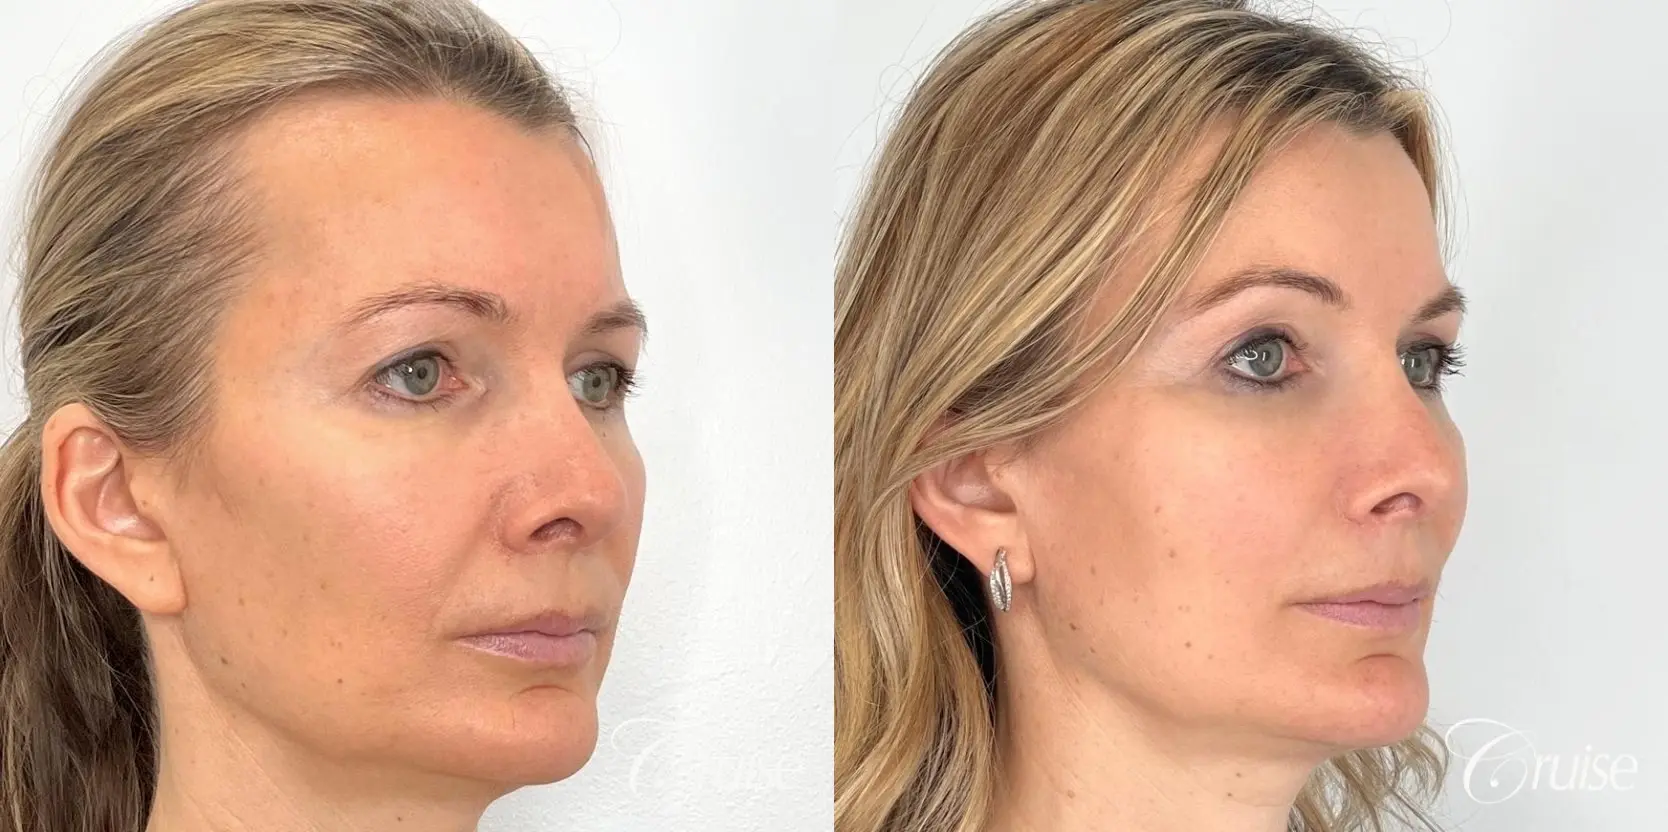 Fat Transfer for Facial Rejuvenation - Before and After 2